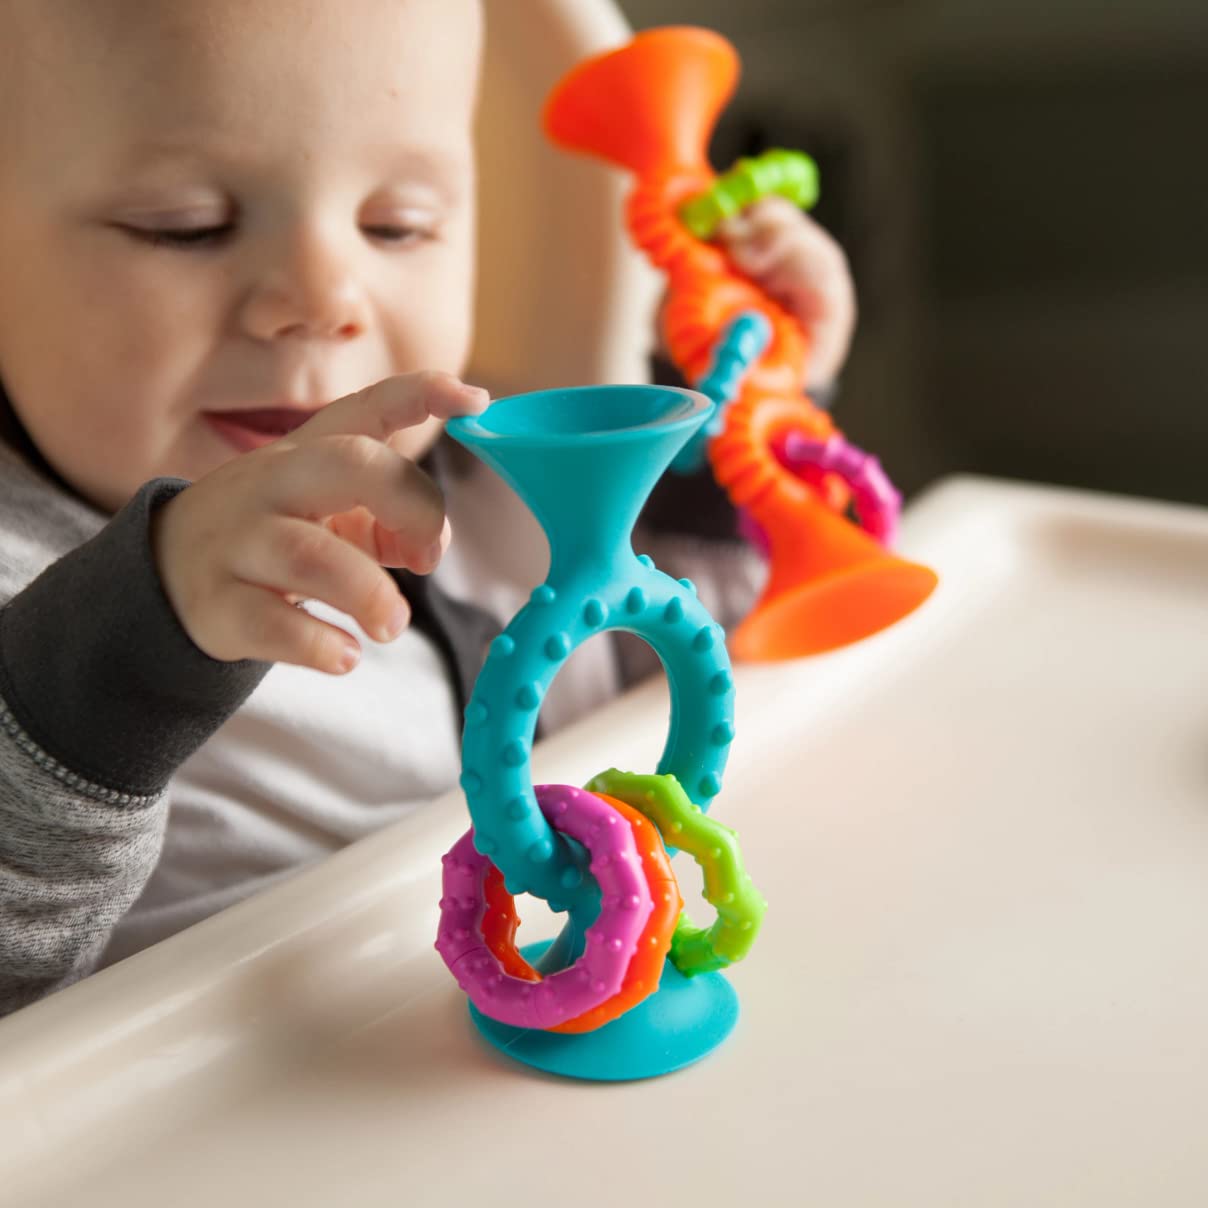 Fat Brain Toys pipSquigz Loops Teal